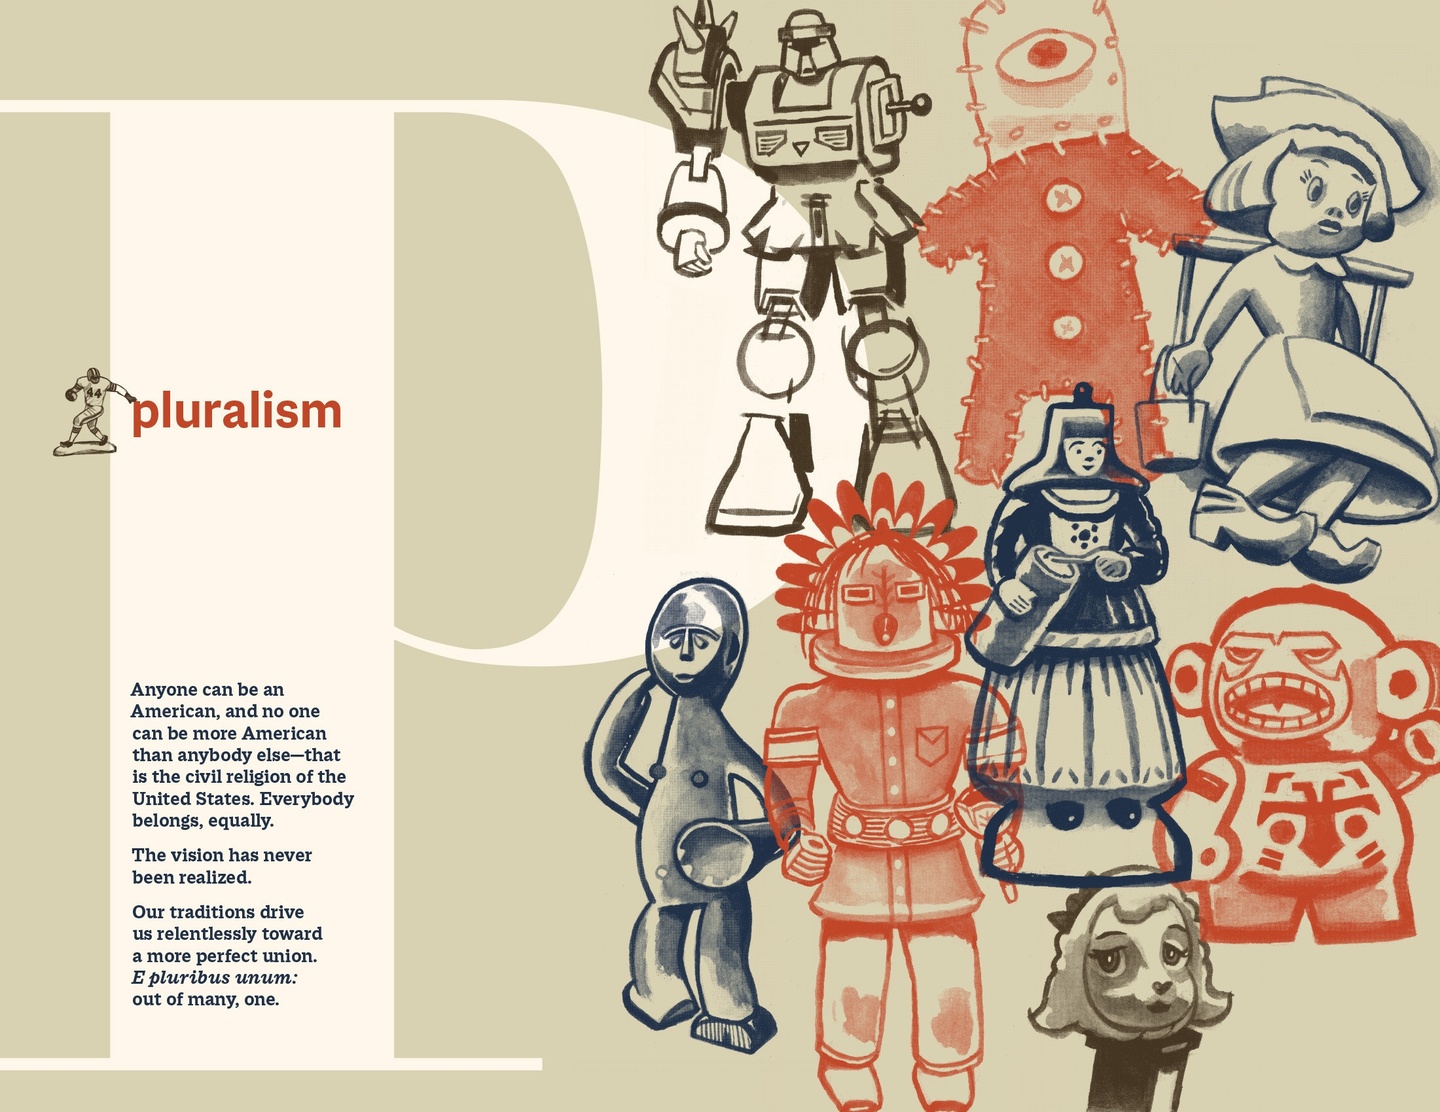 Book page for the letter P-Pluralism, featuring a text block as well as illustrations in red, navy blue, and black of an assortment of toy figures, including robots, dolls, and aliens.